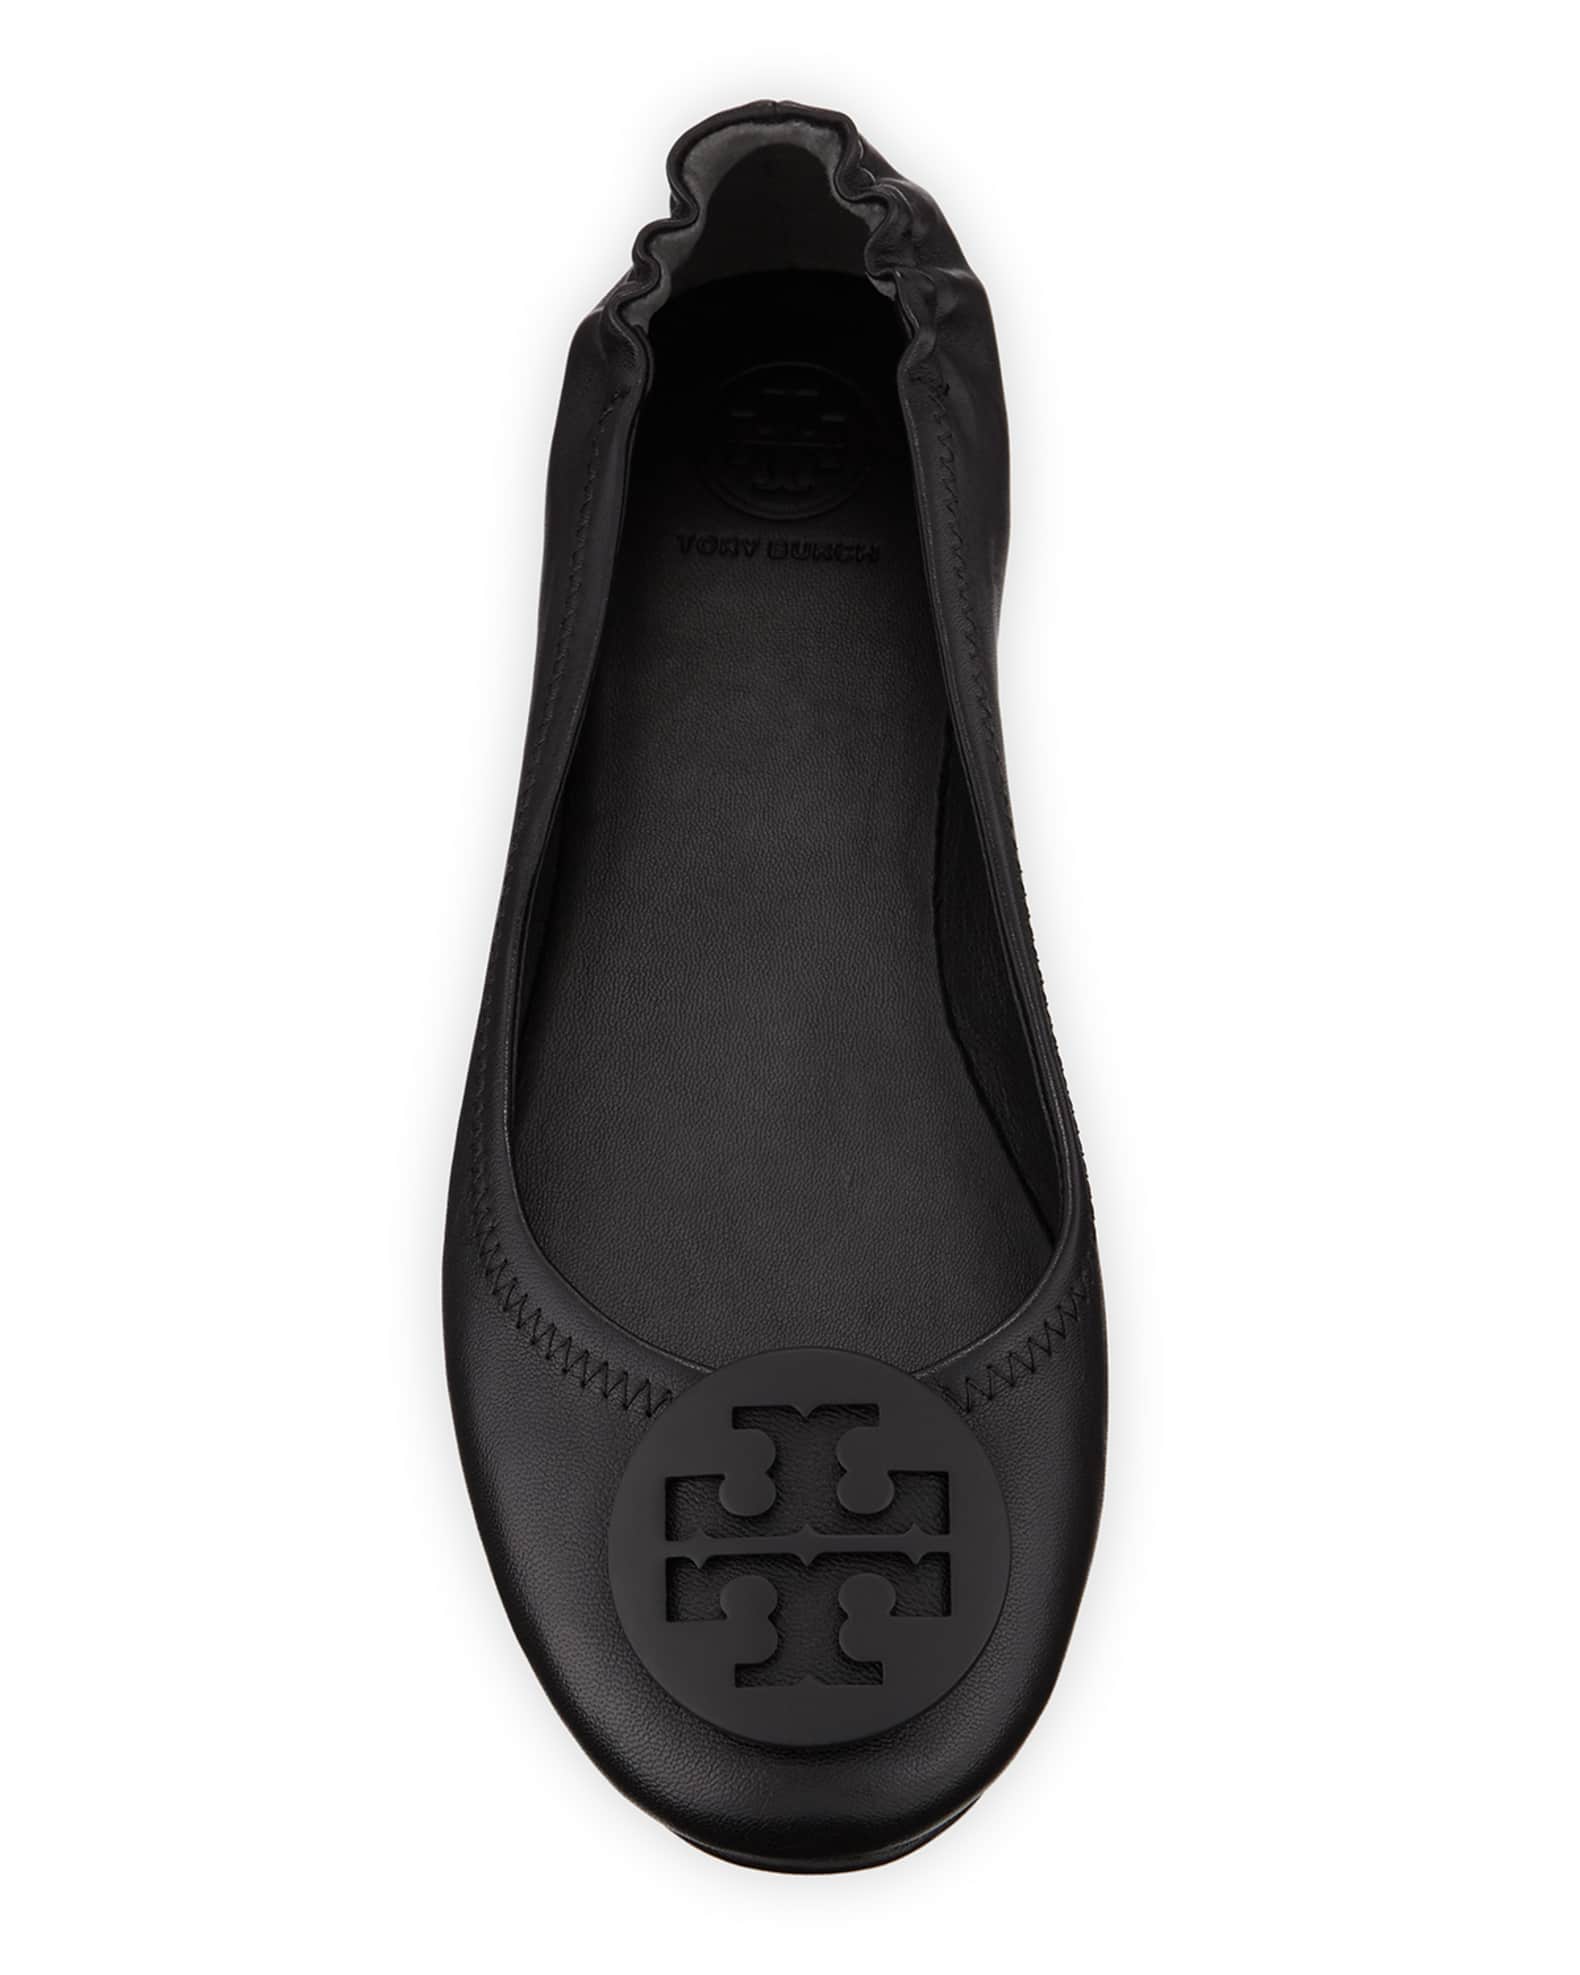 Tory Burch Minnie Travel Leather Ballet Flats | Neiman Marcus